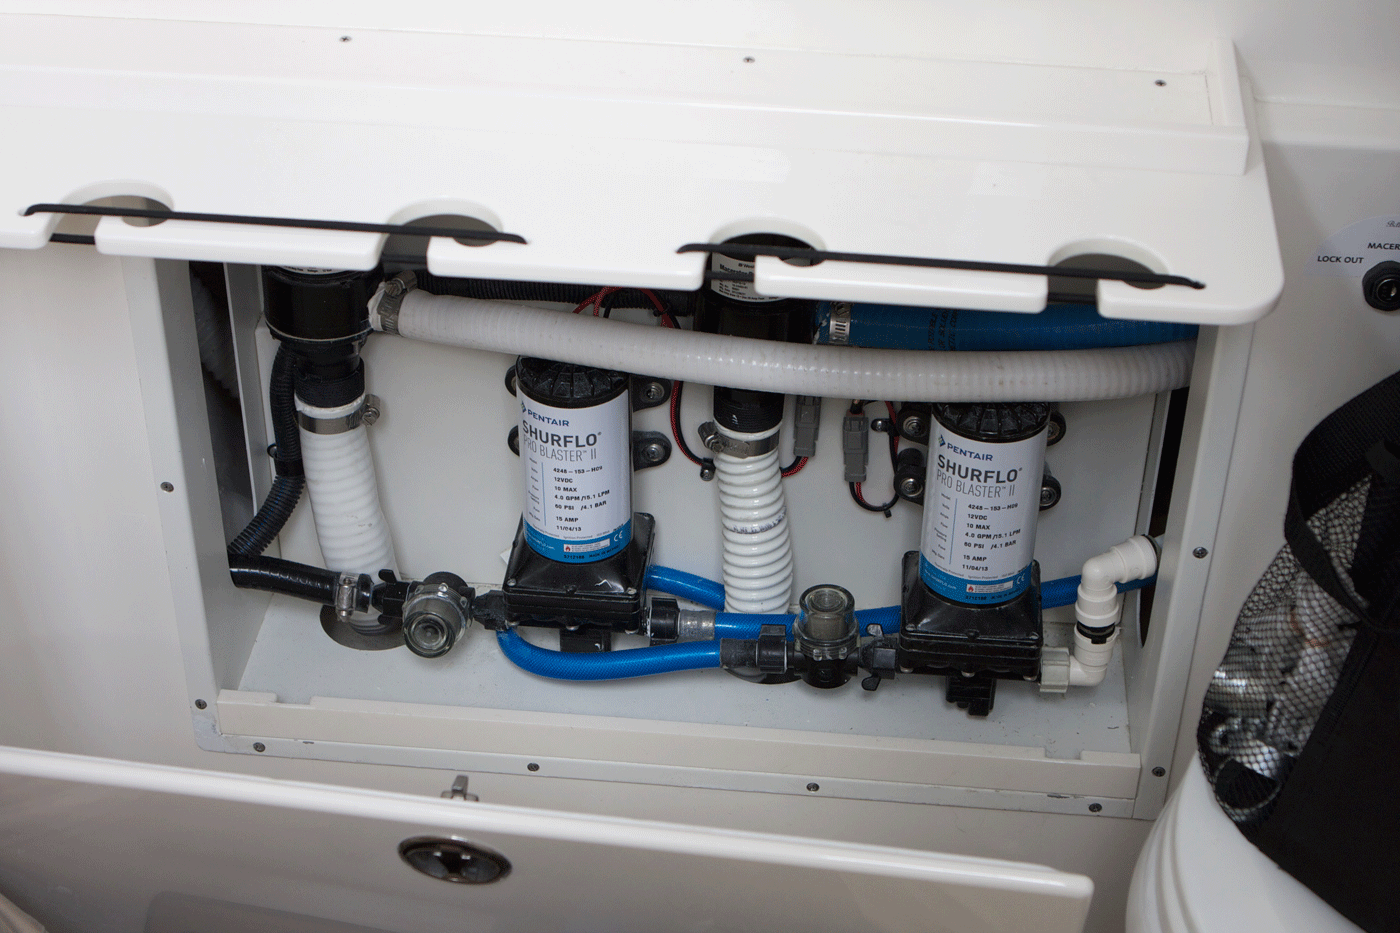 Pressure-water plumbing is just one system that must have potable antifreeze run through it, to prevent freeze damage.